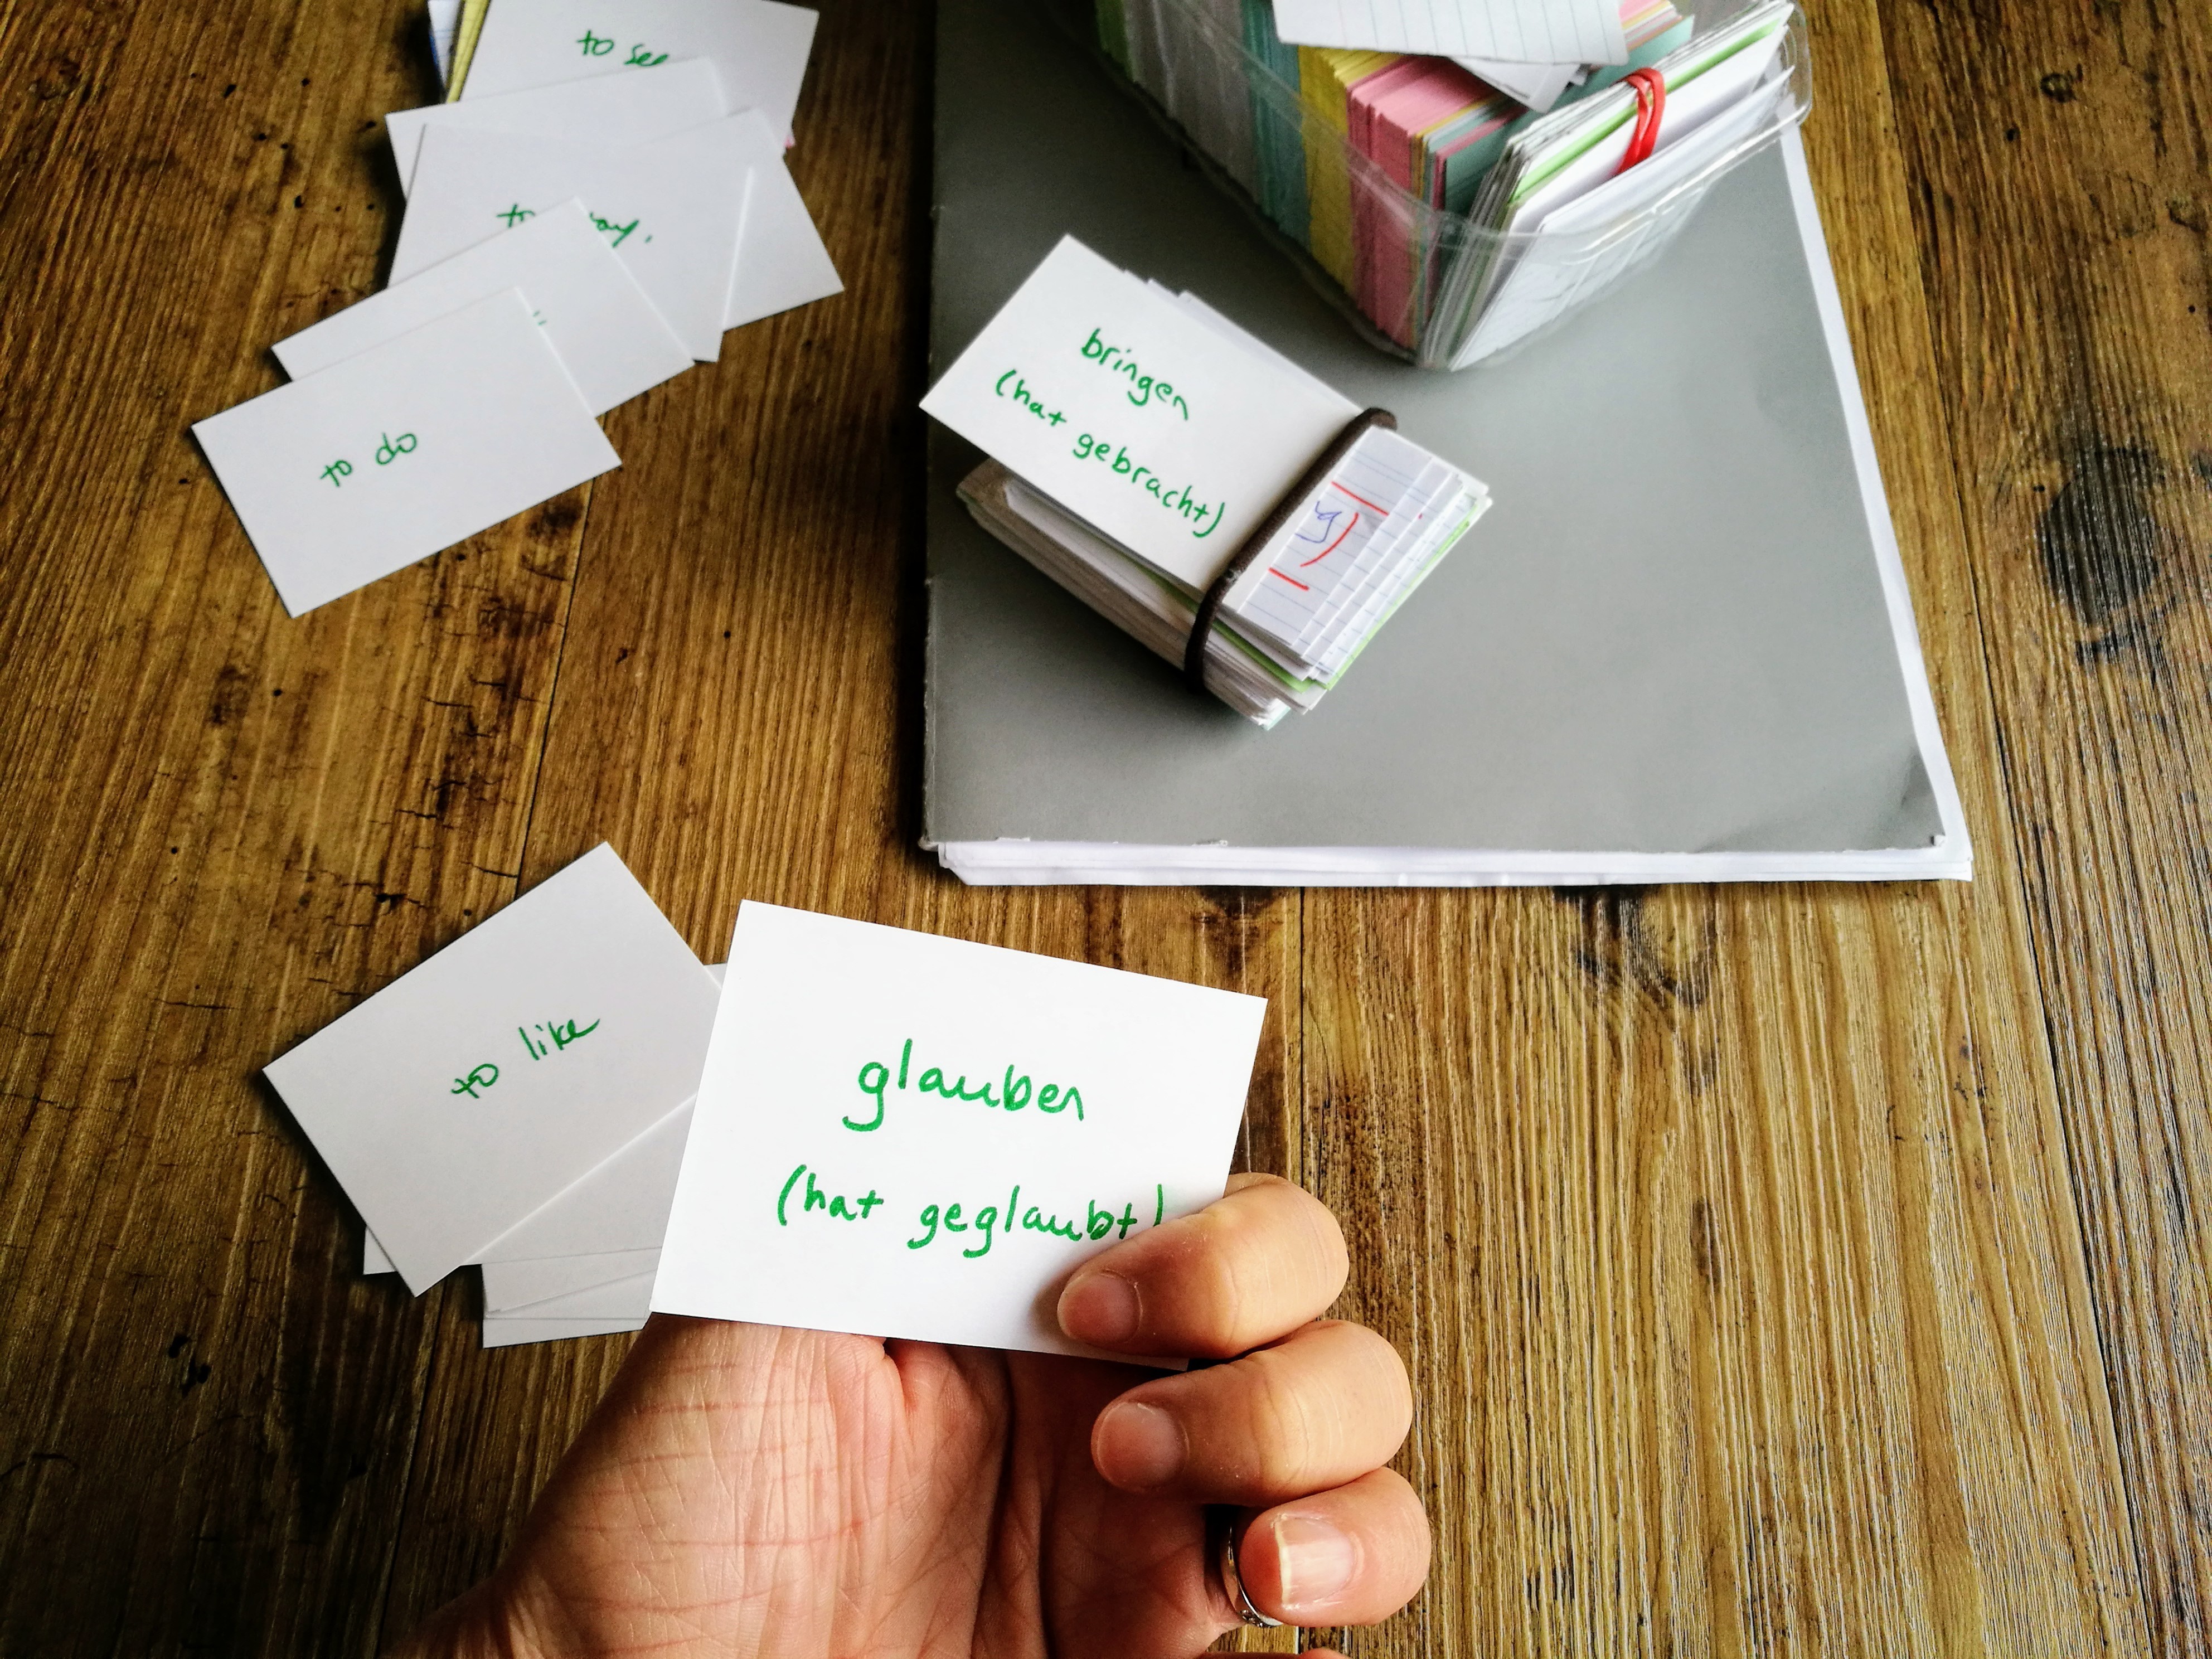 Flashcards for studying benefits